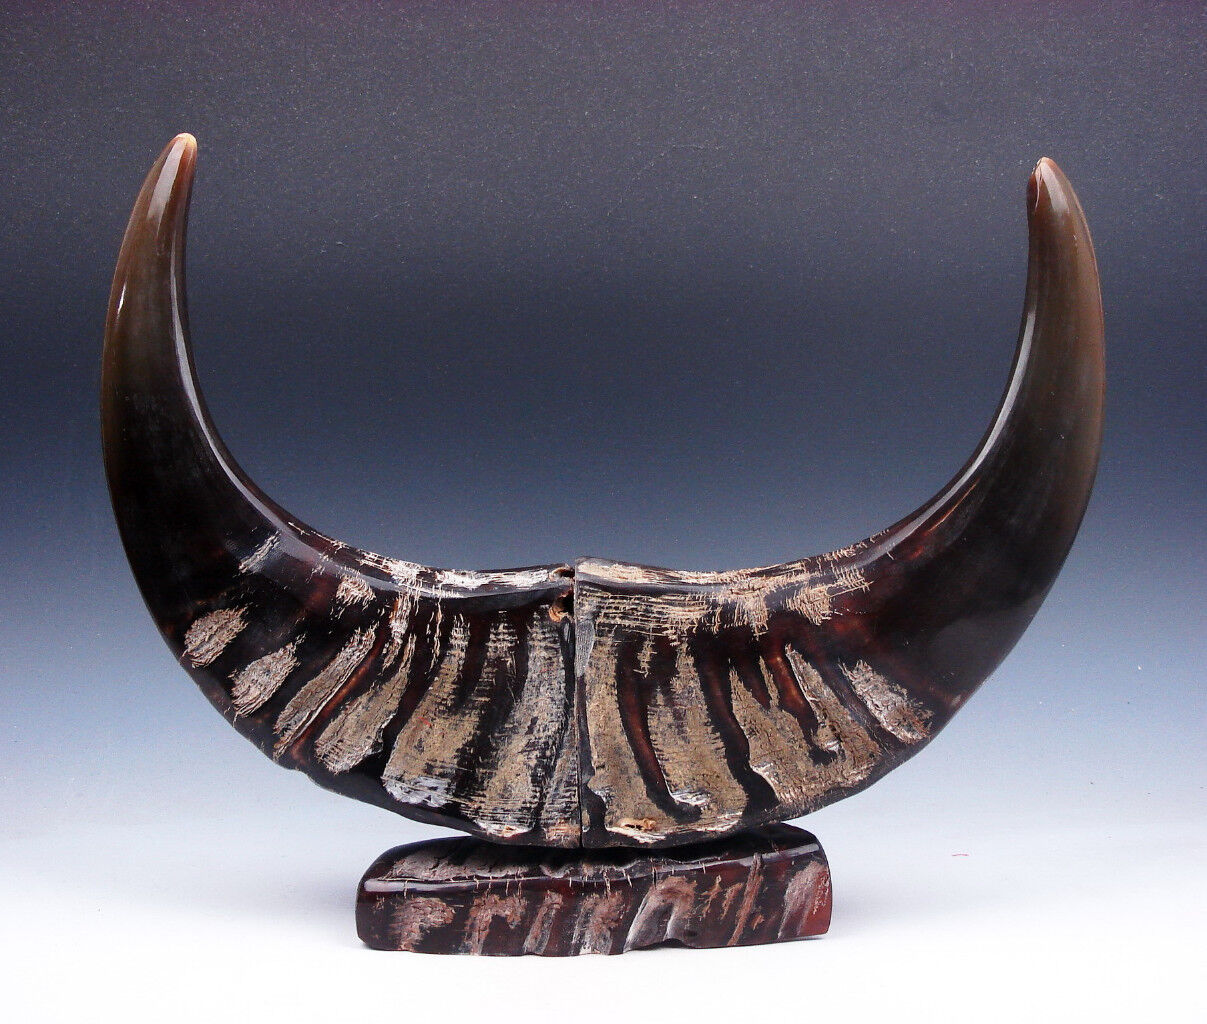 Exquisite Rare Pair Large Natural Ox/Buffalo Horns Awesome Home Decor #03161602